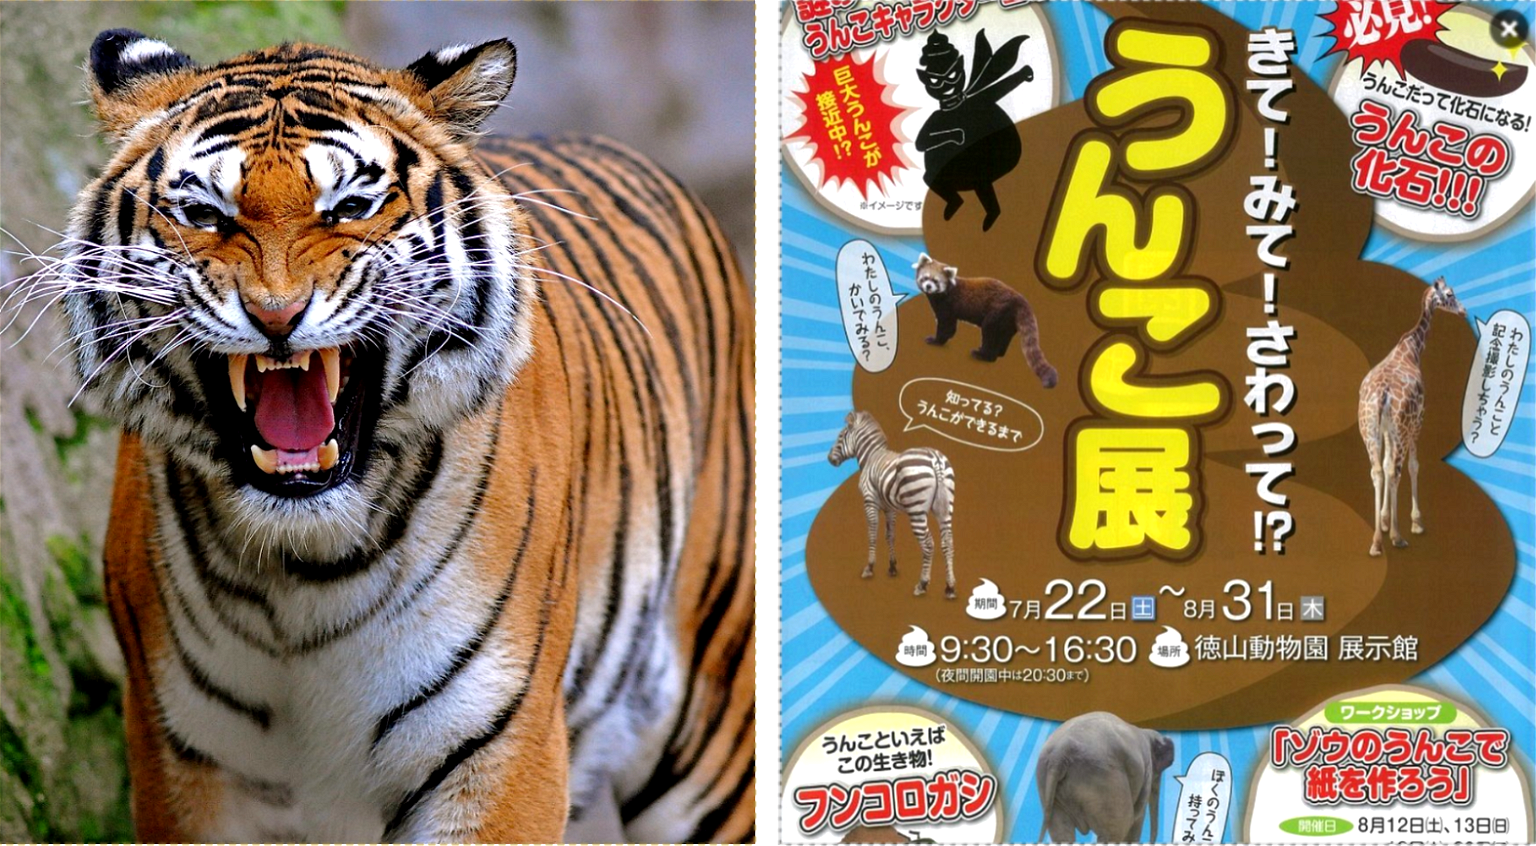 Japanese Zoo Features Bizarre Exhibition Where Guests Can Play With Animal Poop